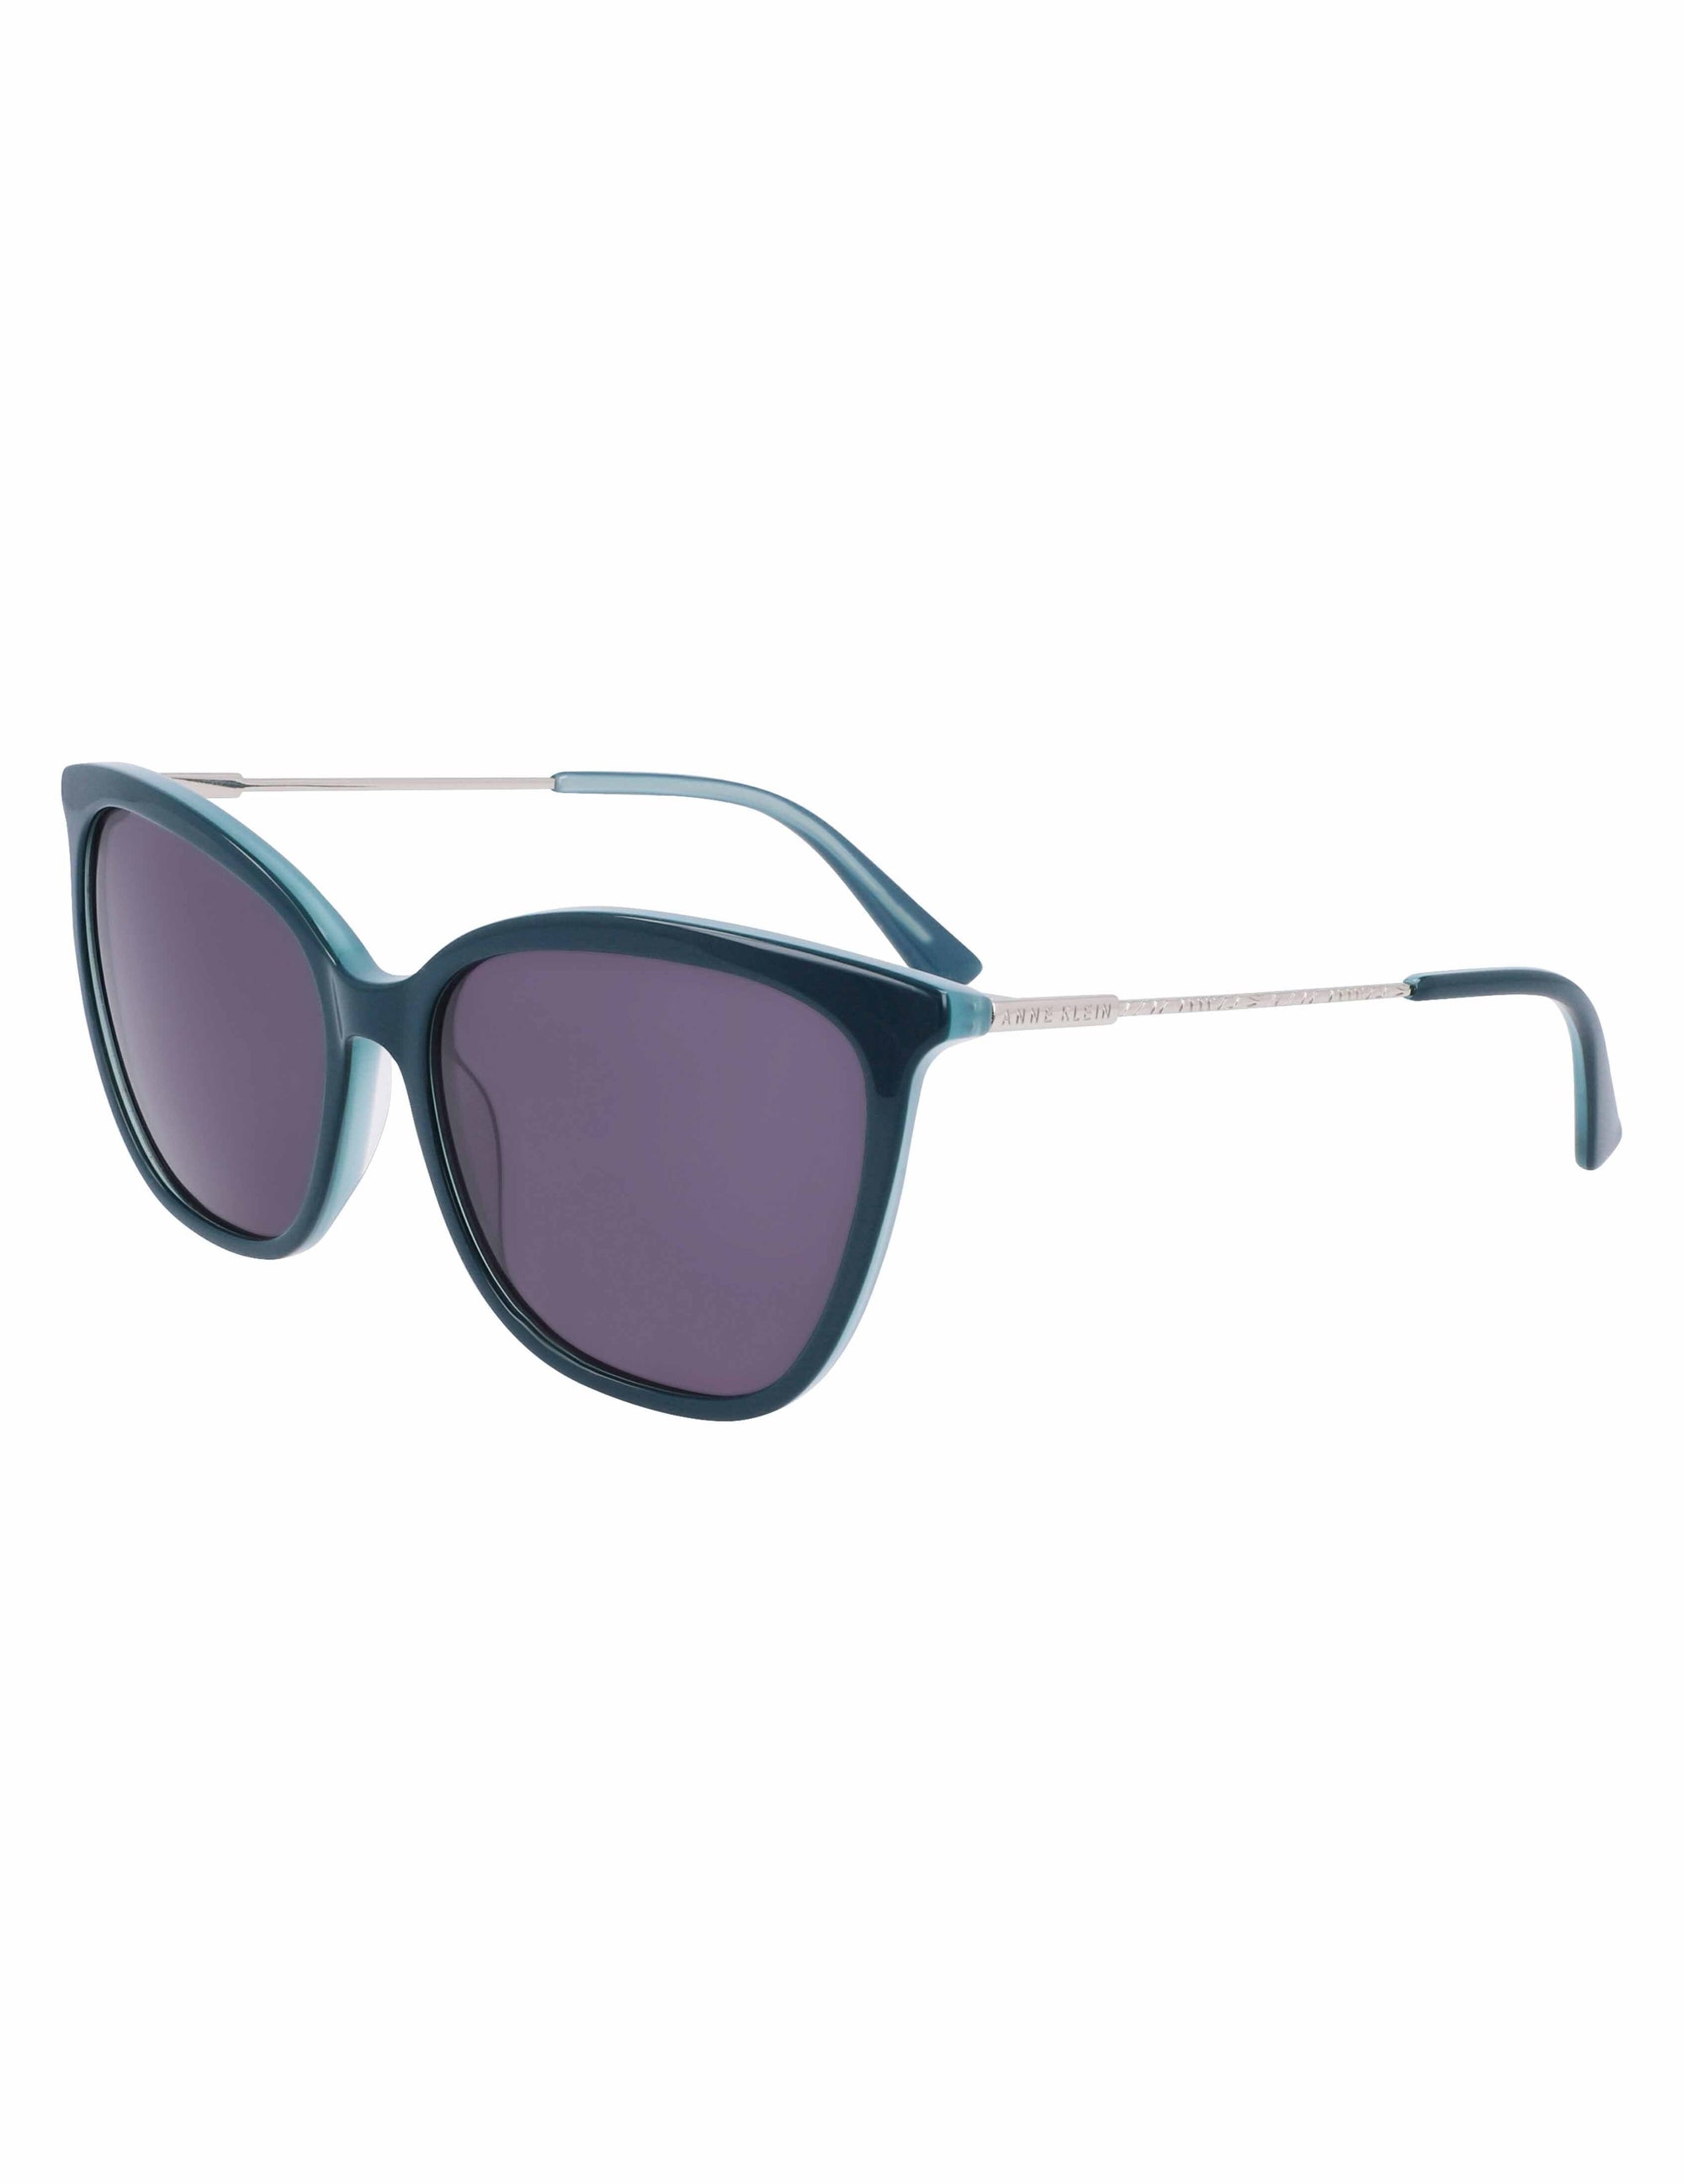 Anne Klein Teal Oversized Square Sunglasses